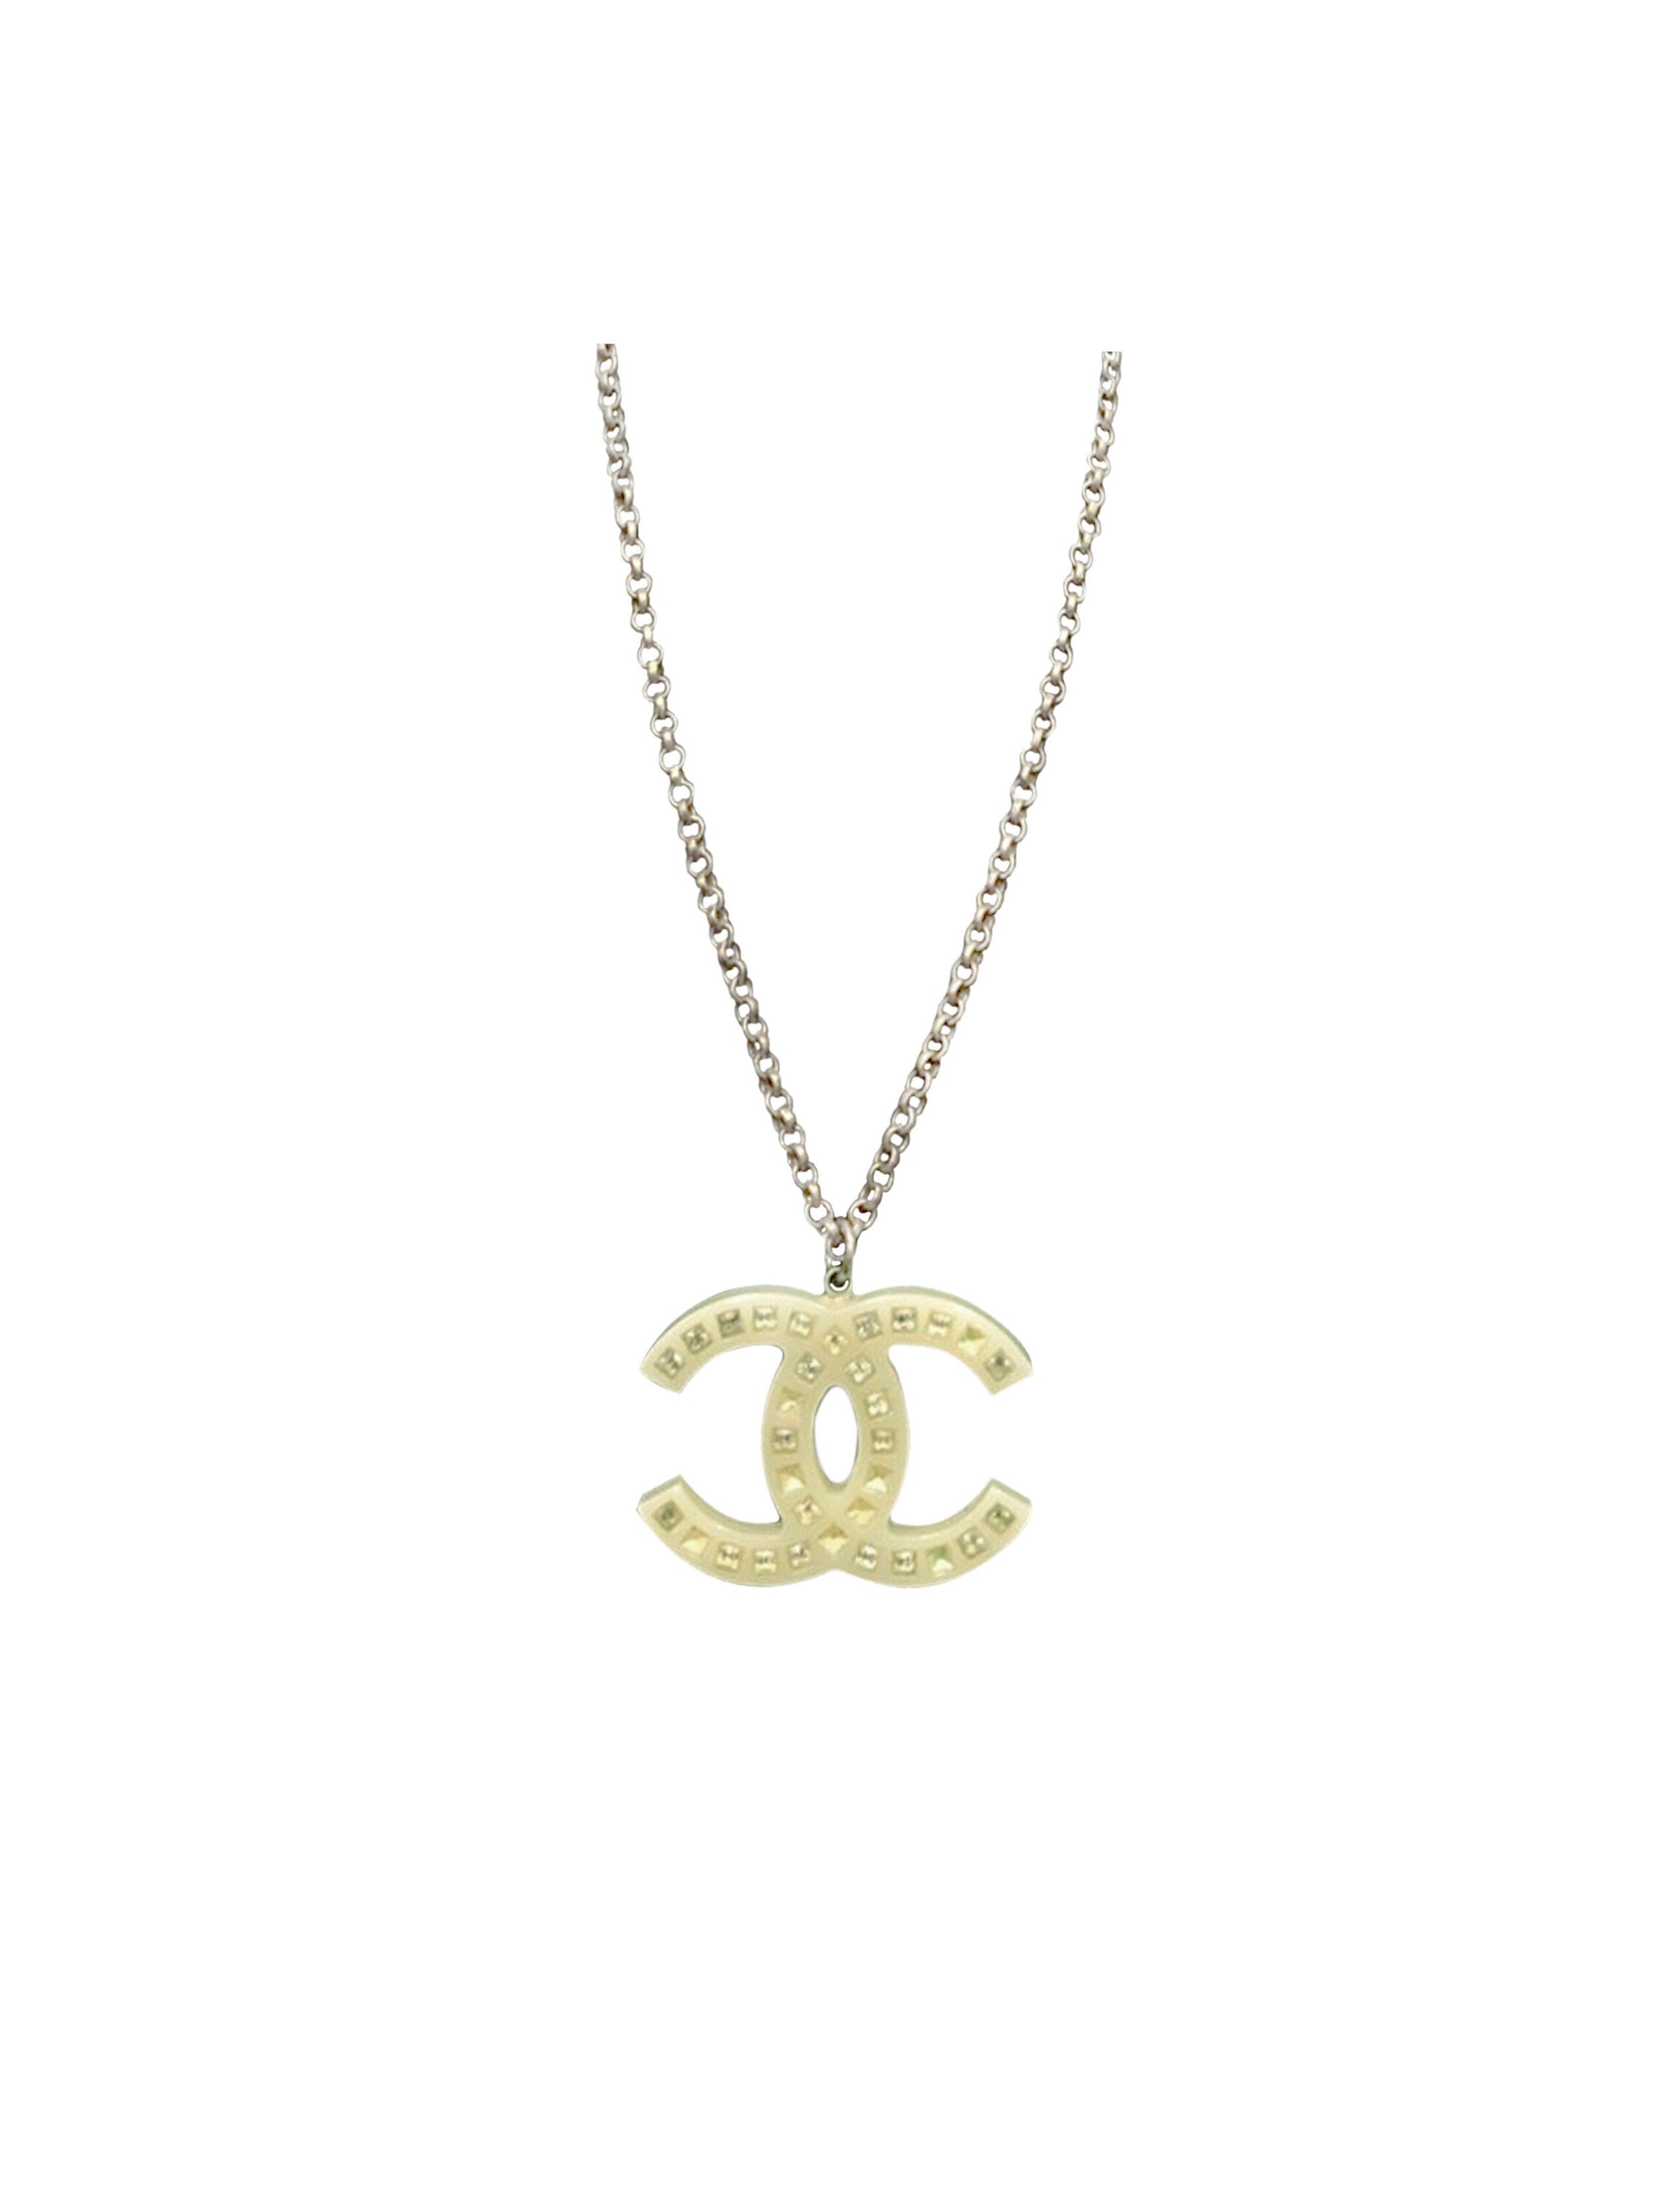 Chanel 2000s Plastic Resin Large CC Necklace